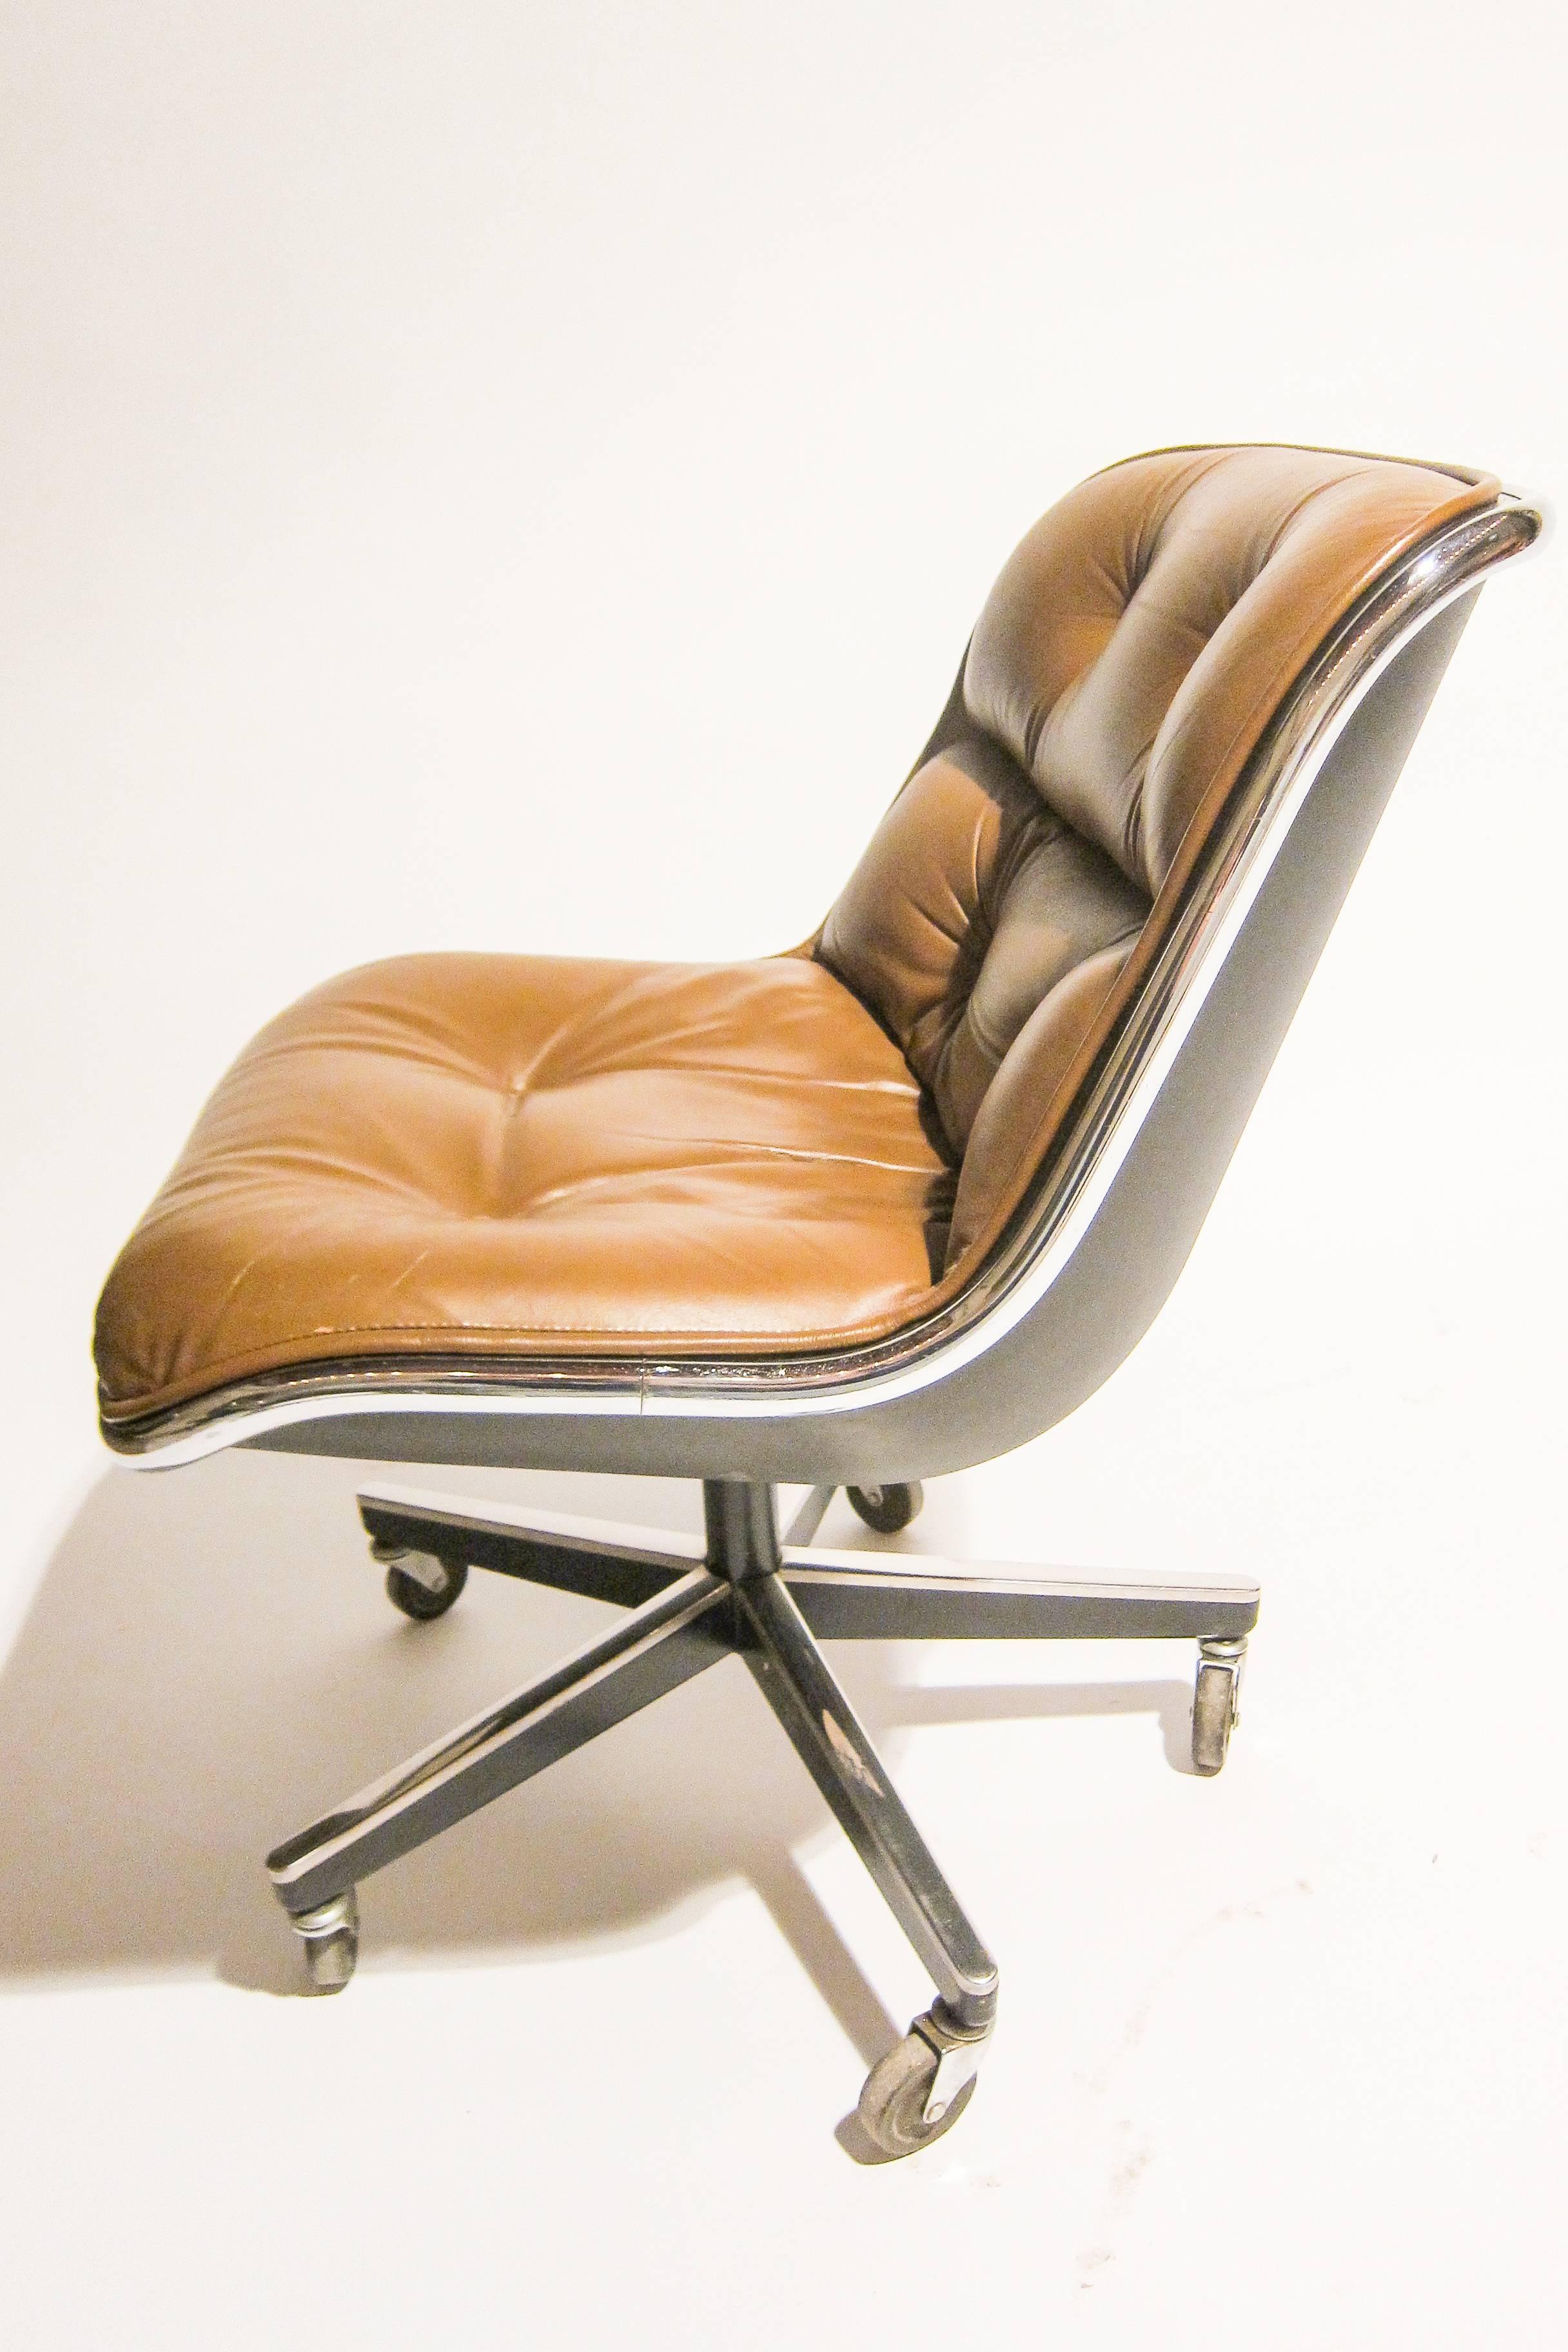 Leather executive or dining chair by Charles Pollock for Knoll International. 

Structured out of a chrome rim that gives the chair support and aesthetic appeal. The tufted tan leather with padding makes for a comfortable experience. There are